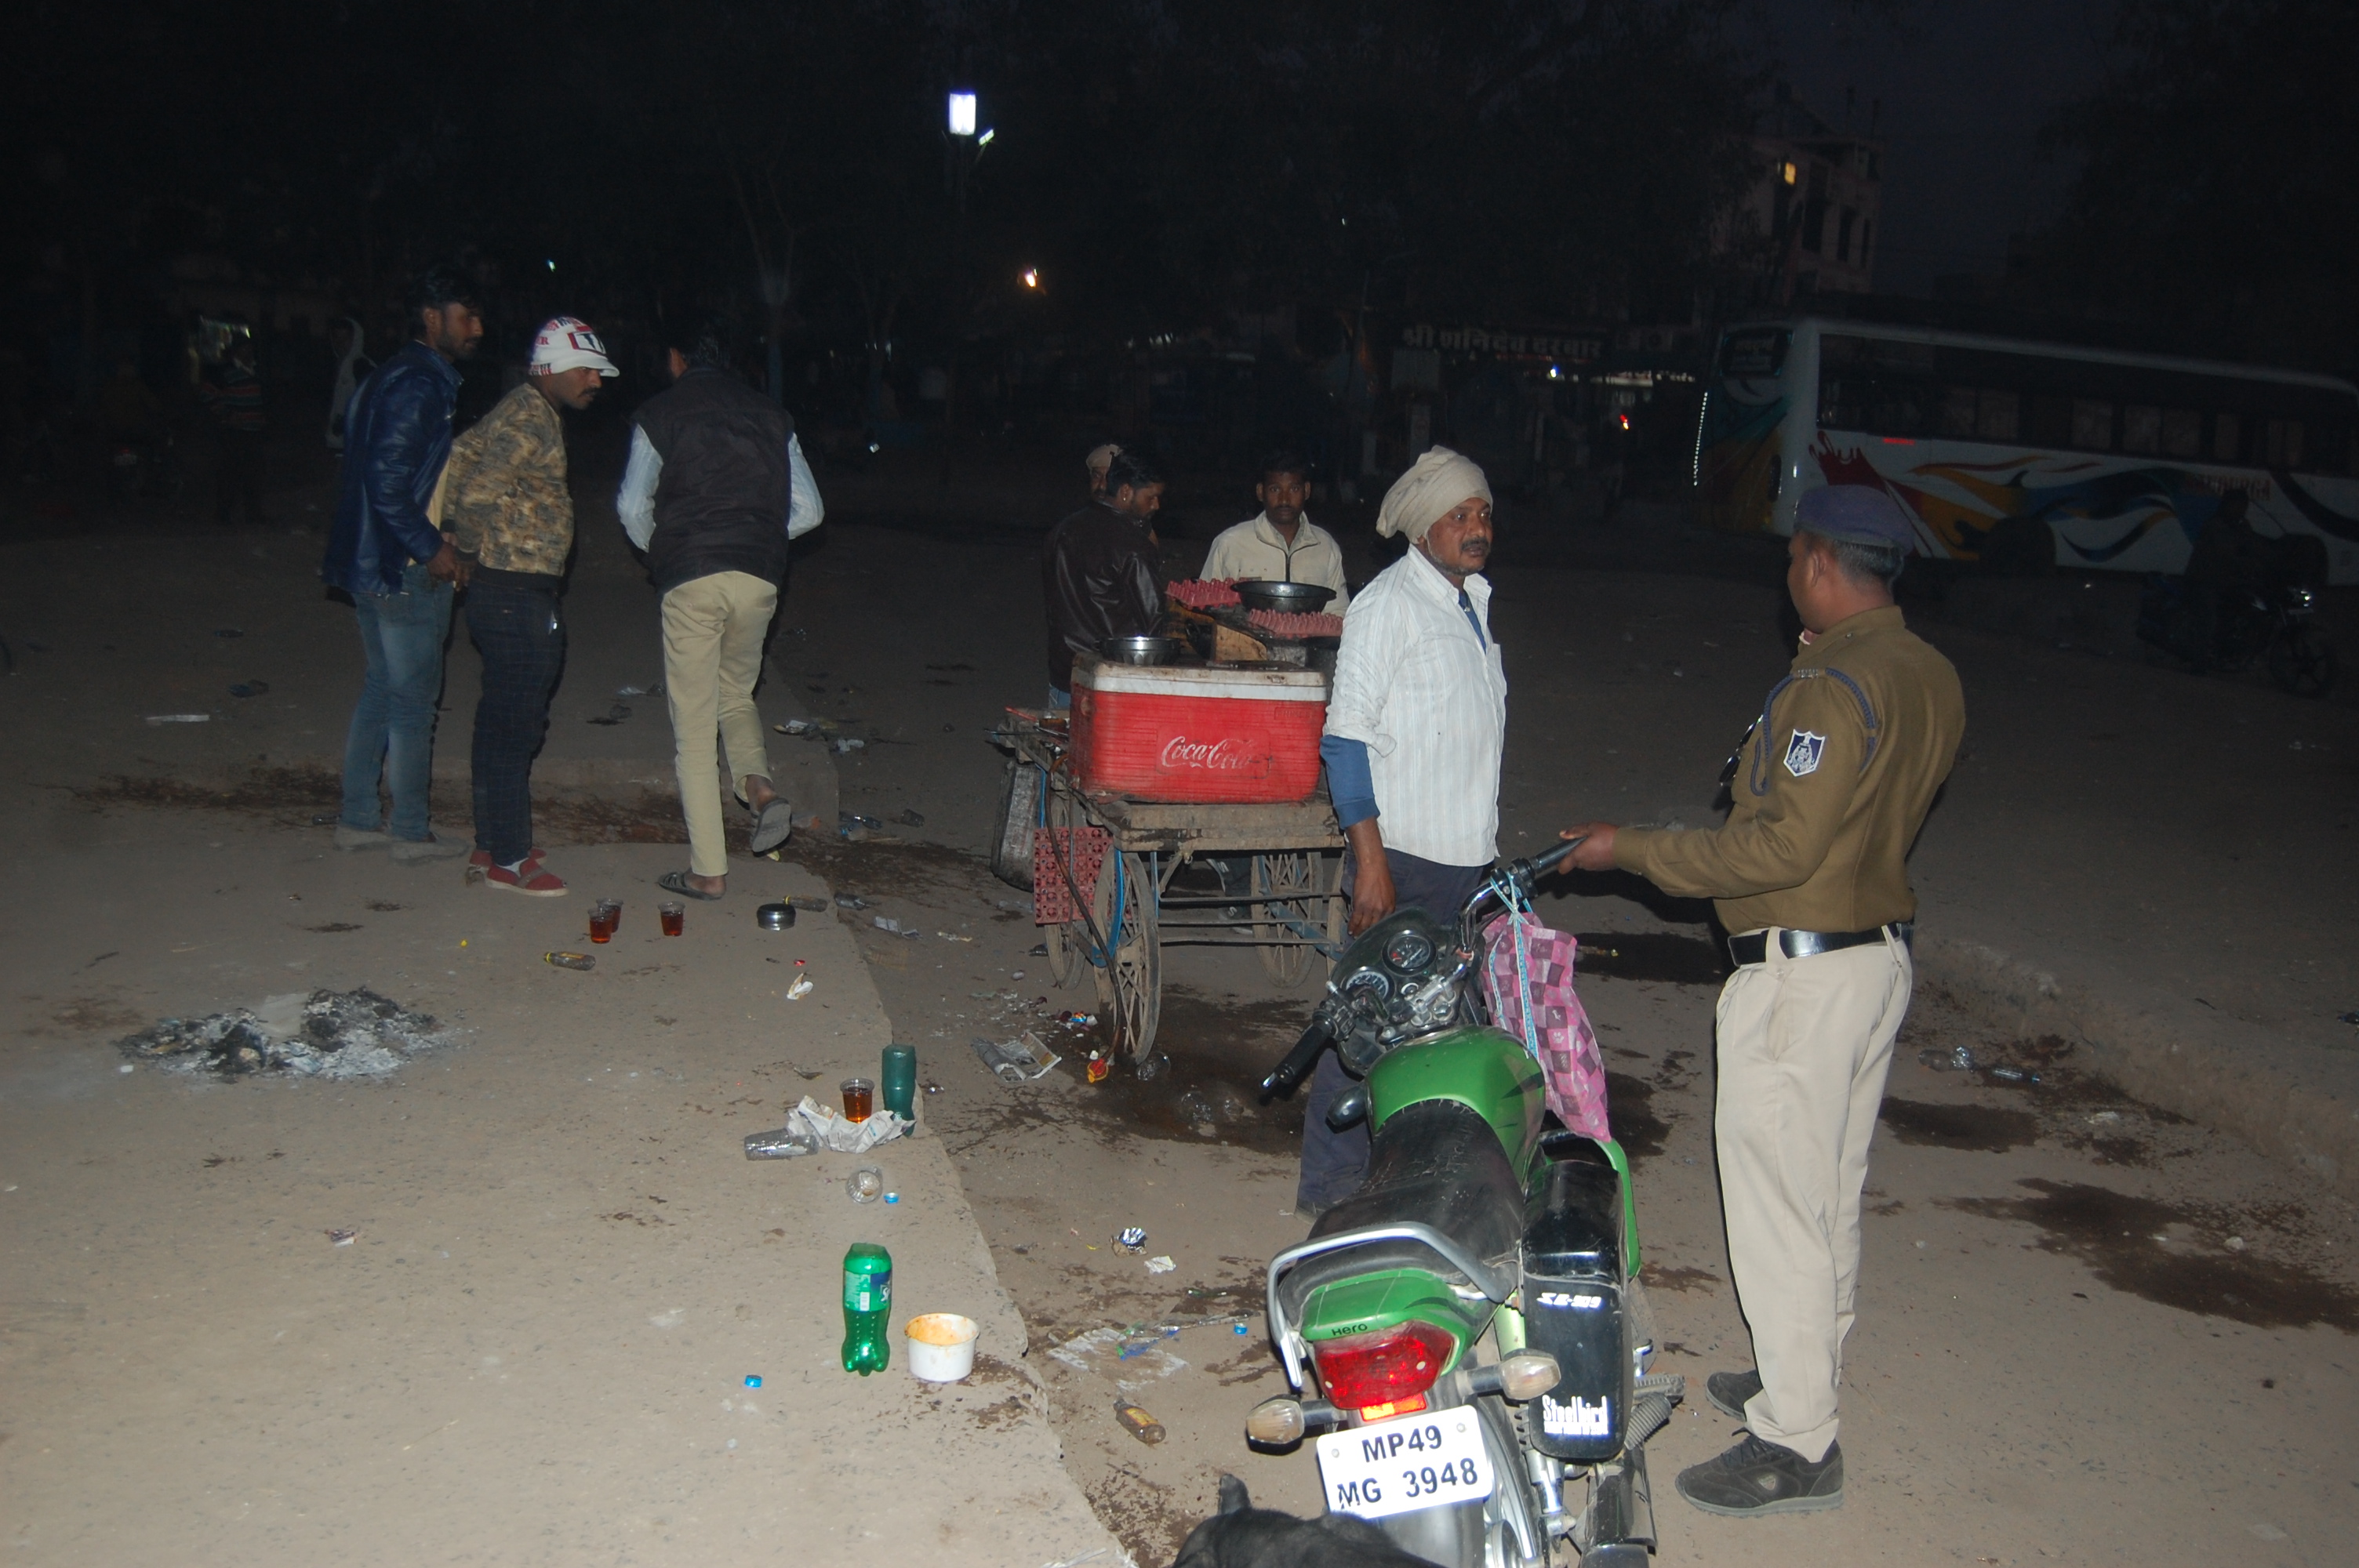 Police action in the open bar of the aquara market